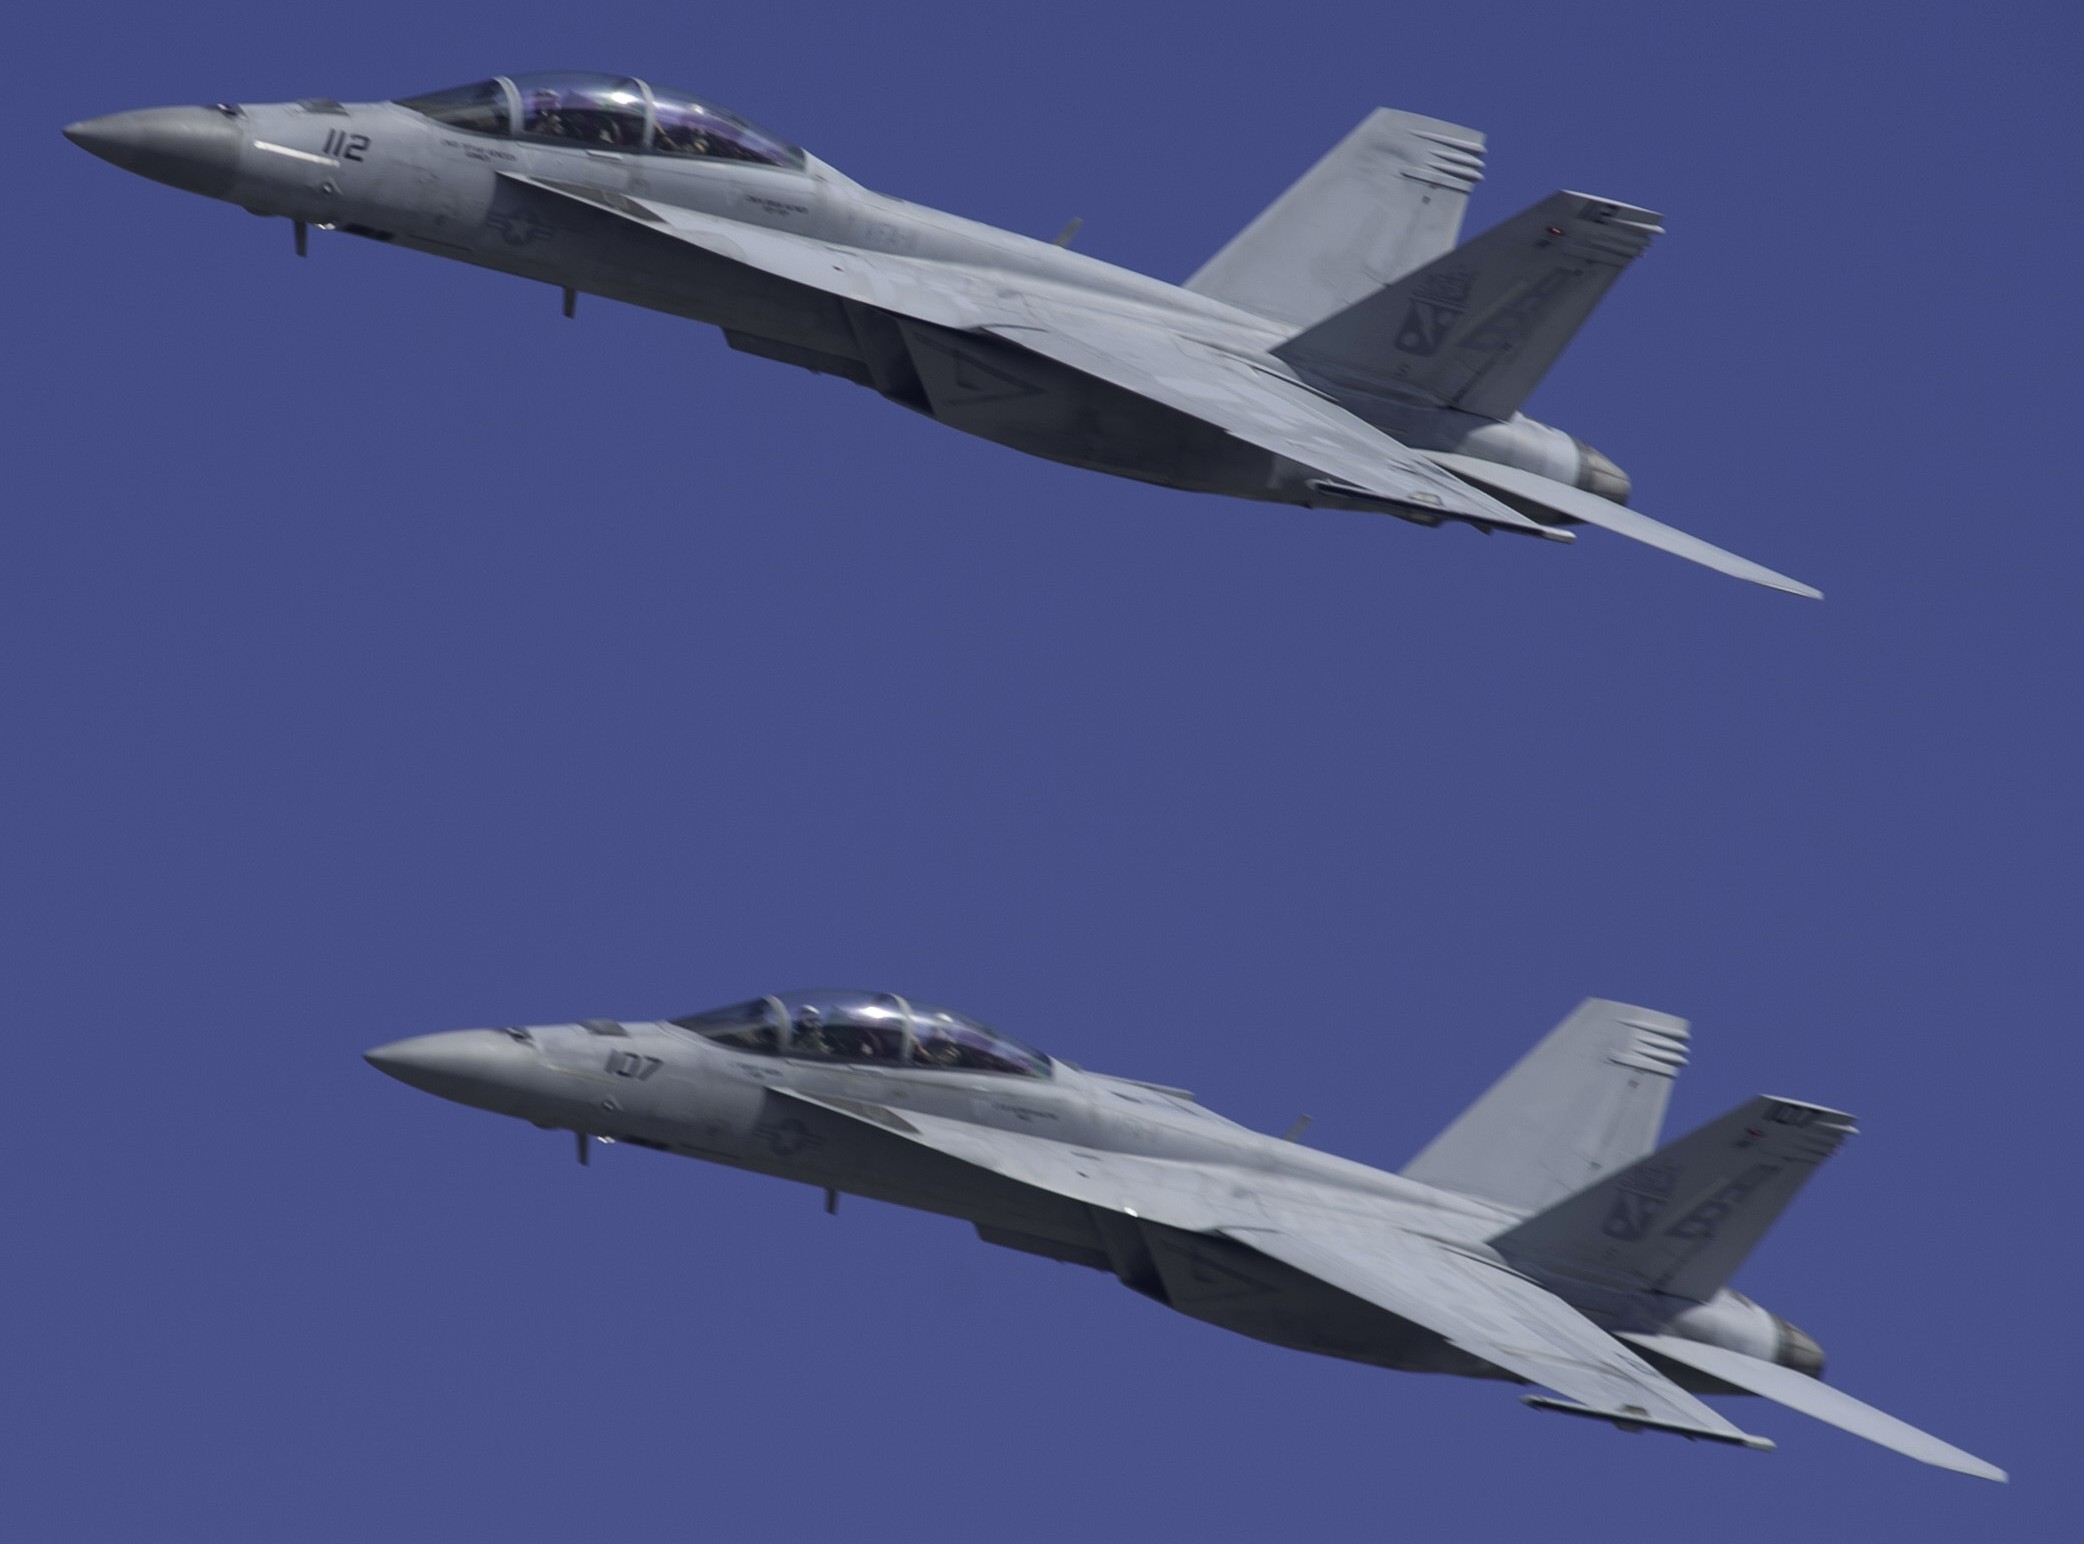 vfa-11 red rippers strike fighter squadron us navy f/a-18f super hornet nas oceana virginia 99